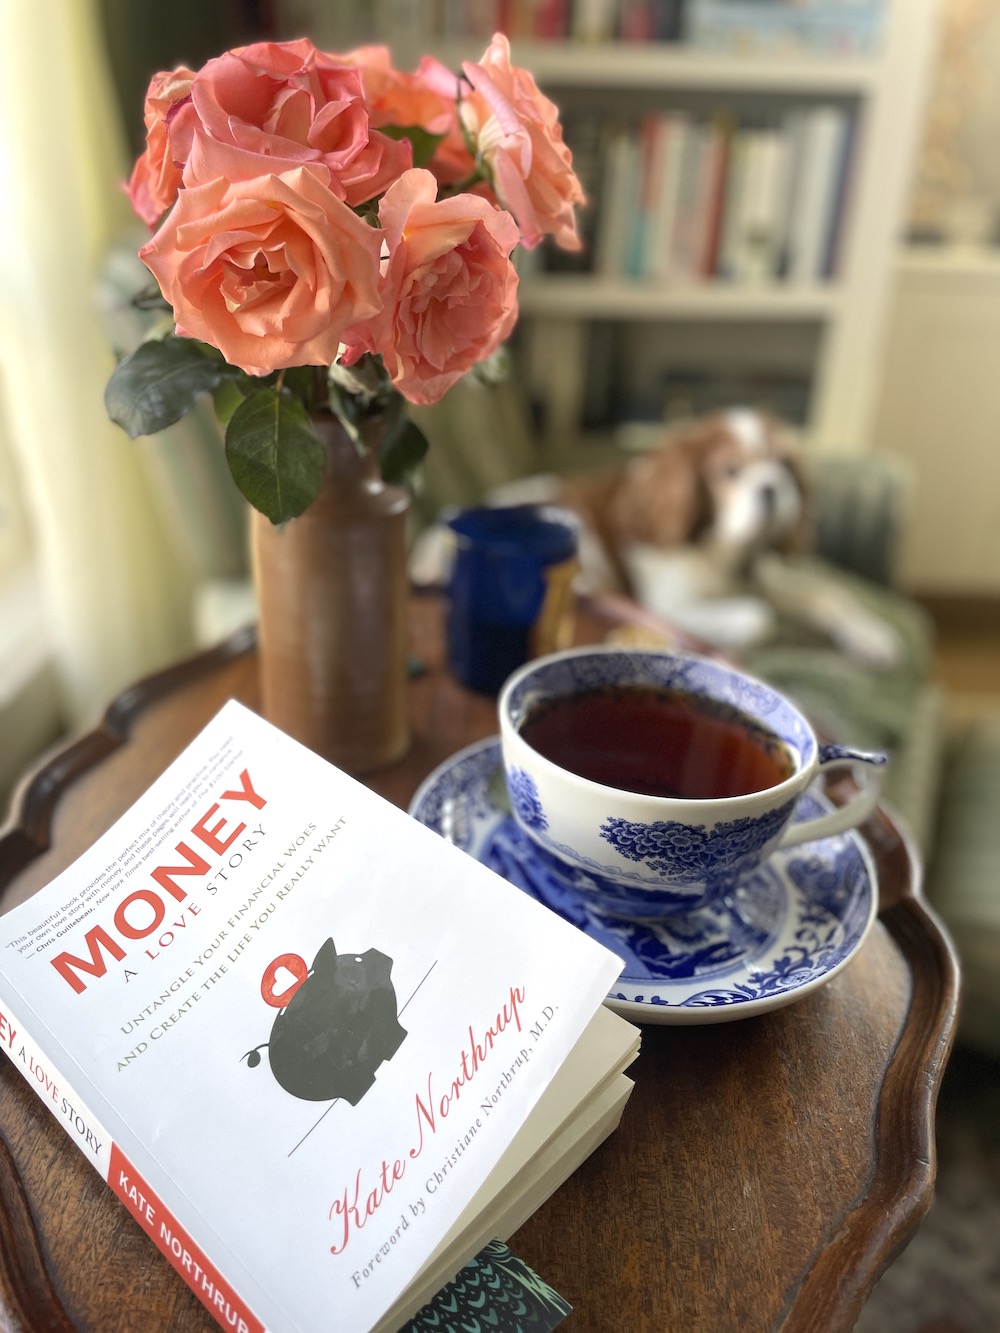 354: How to Find Your Financial Freedom: The Importance of Understanding, Writing and LIVING Your Love Story with Money